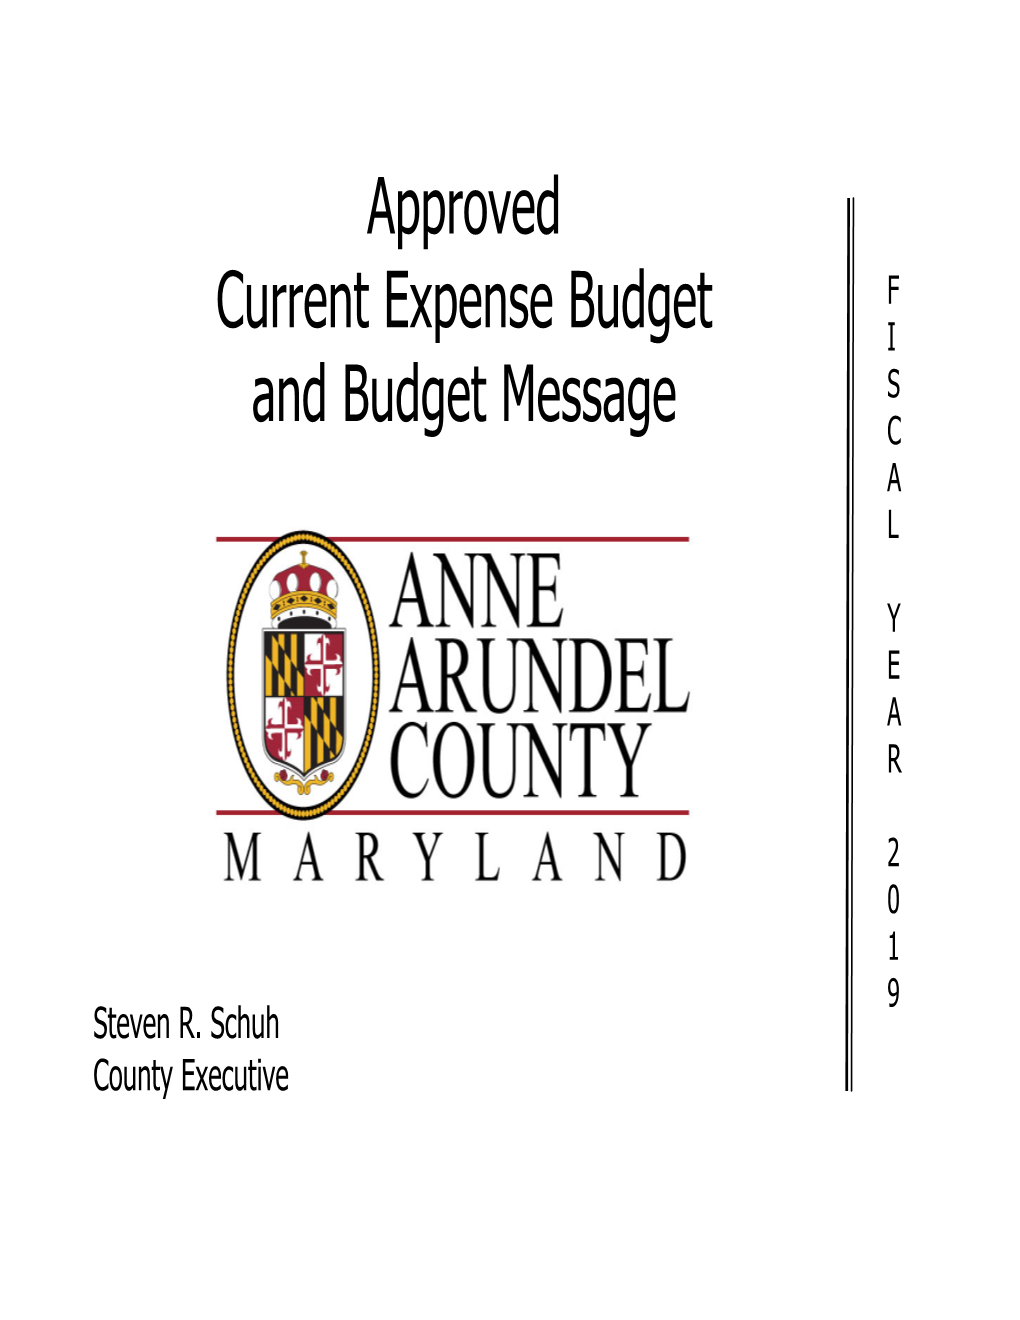 FY19 Approved Current Expense Budget and Budget Message